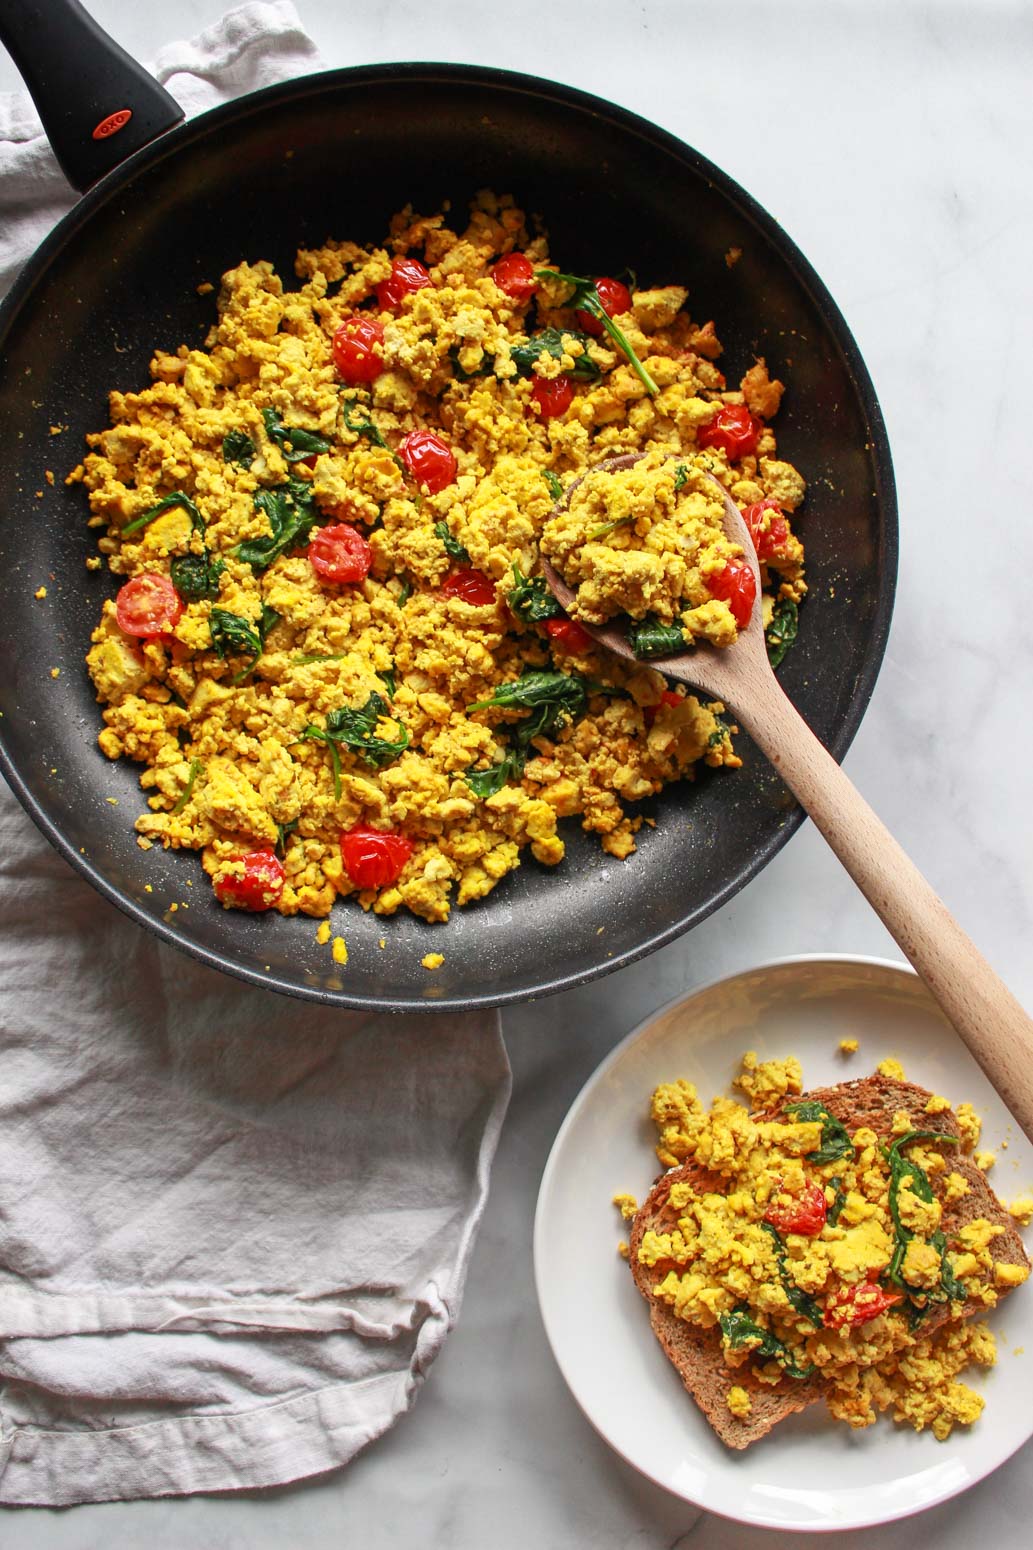 How to make a super flavorful tofu scramble with spinach and cherry tomatoes. Forget about “bland” tofu, this tofu scramble is bursting with umami flavor, seasoned with nutritional yeast and tahini. A great plant-based alternative to scrambled eggs, this flavorful tofu scramble recipe is sure to be a vegan breakfast favorite!